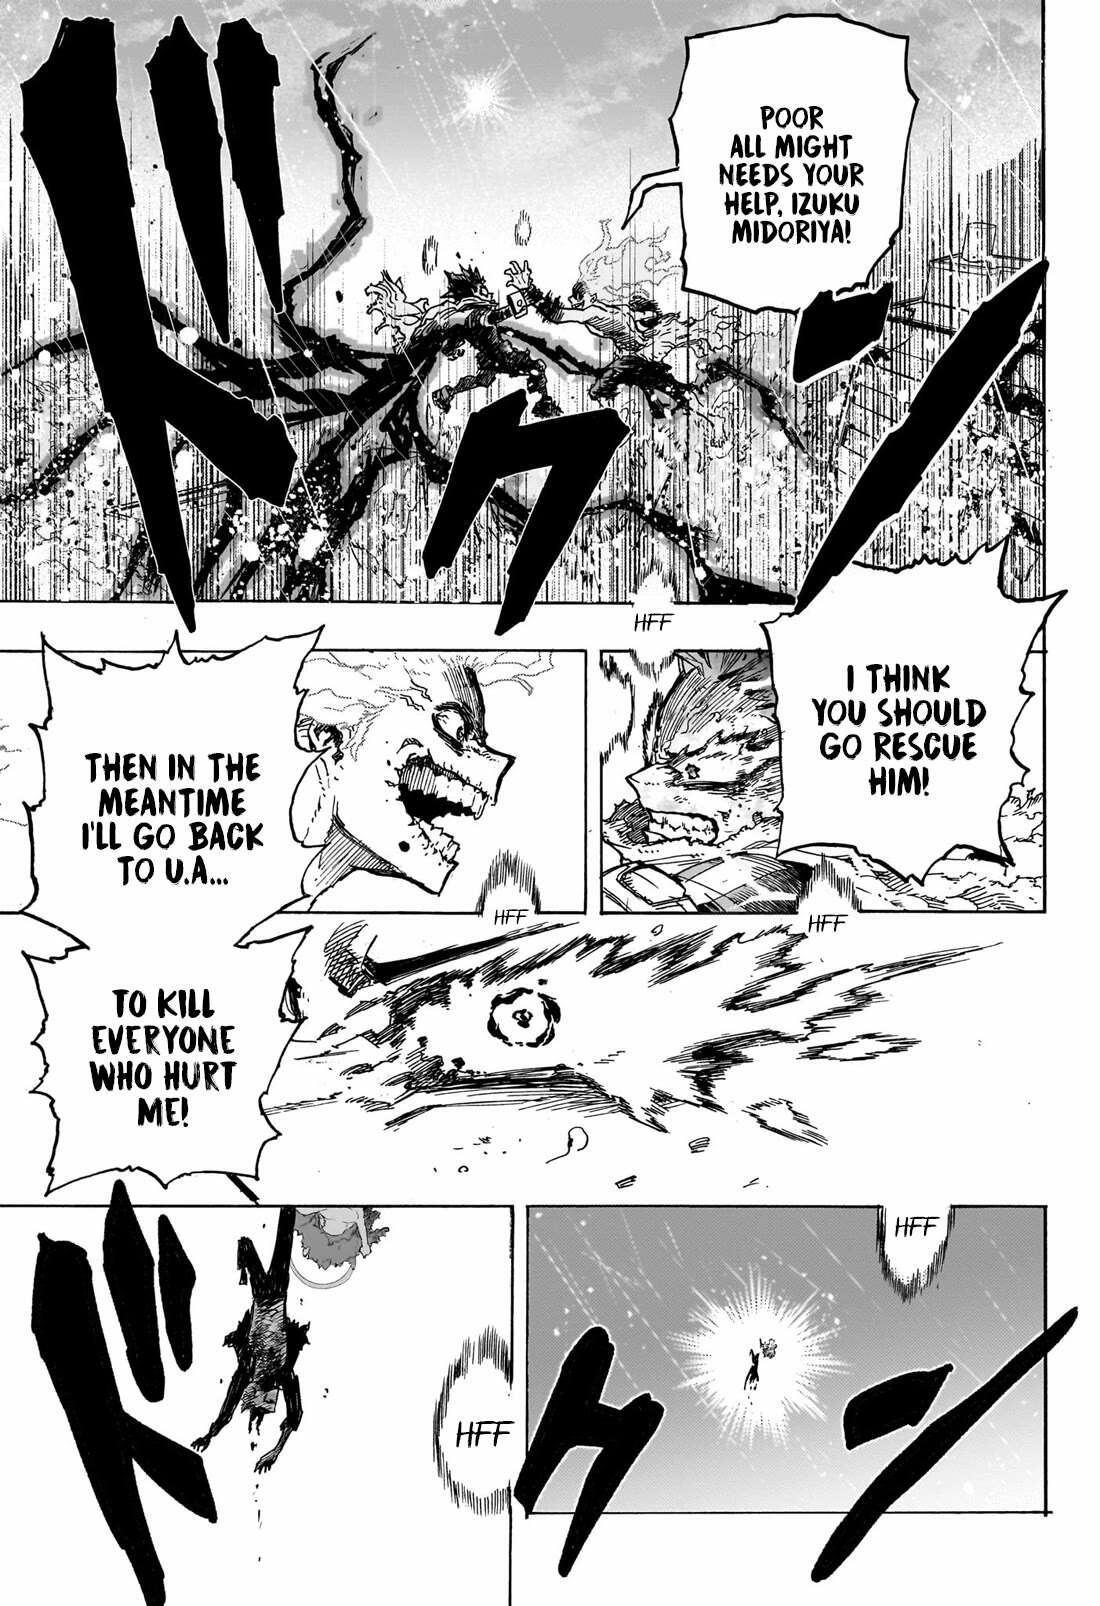 My Hero Academia chapter 402: All Might says goodbye to Deku as he uses his  last move against All For One